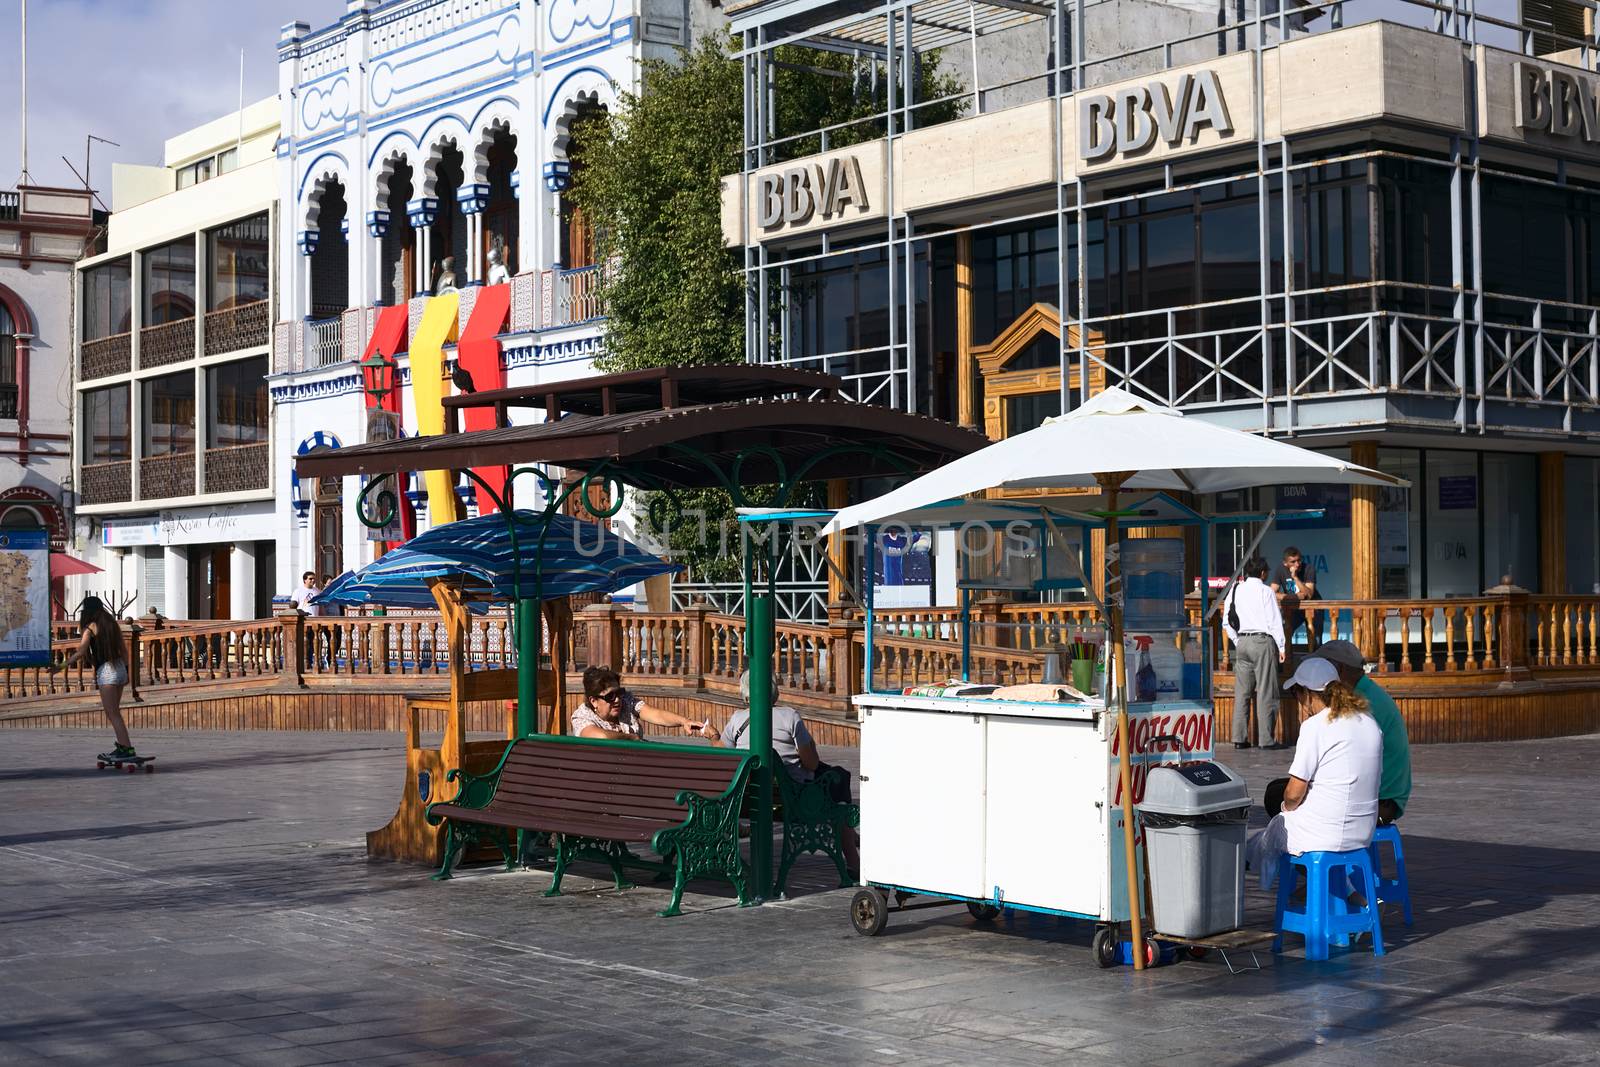 IQUIQUE, CHILE - JANUARY 22, 2015: Unidentified people sitting at Mote con Huesillo (Chilean cold drink) stand on Plaza Prat main square with the building of BBVA bank and the Casino Espanol next to it on January 22, 2015 in Iquique, Chile